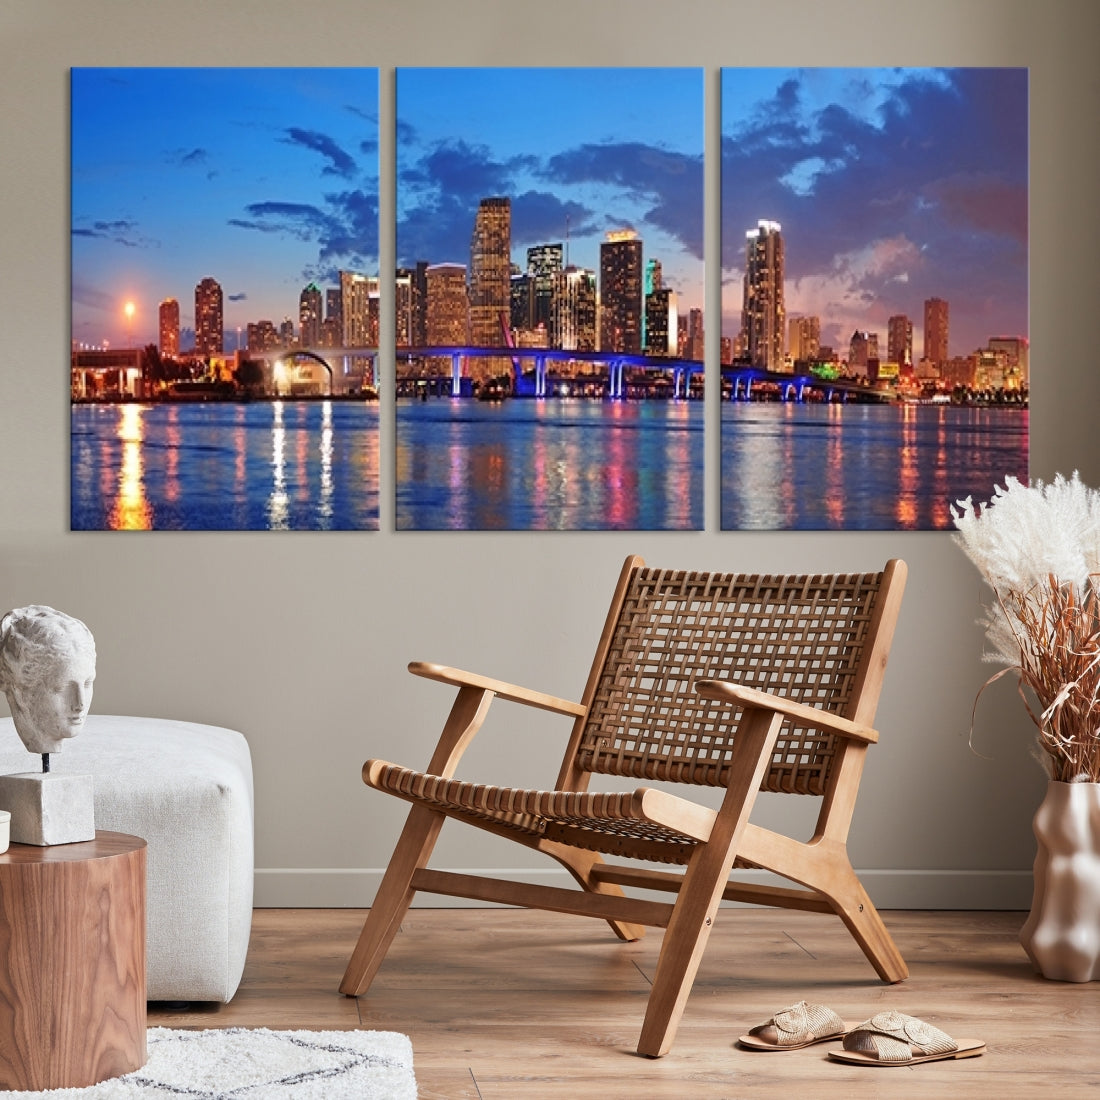 Large Wall Art MIAMI Canvas Print - Miami City Skyline Panorama at Dusk with Urban Skyscrapers and Bridge over Sea with Reflection